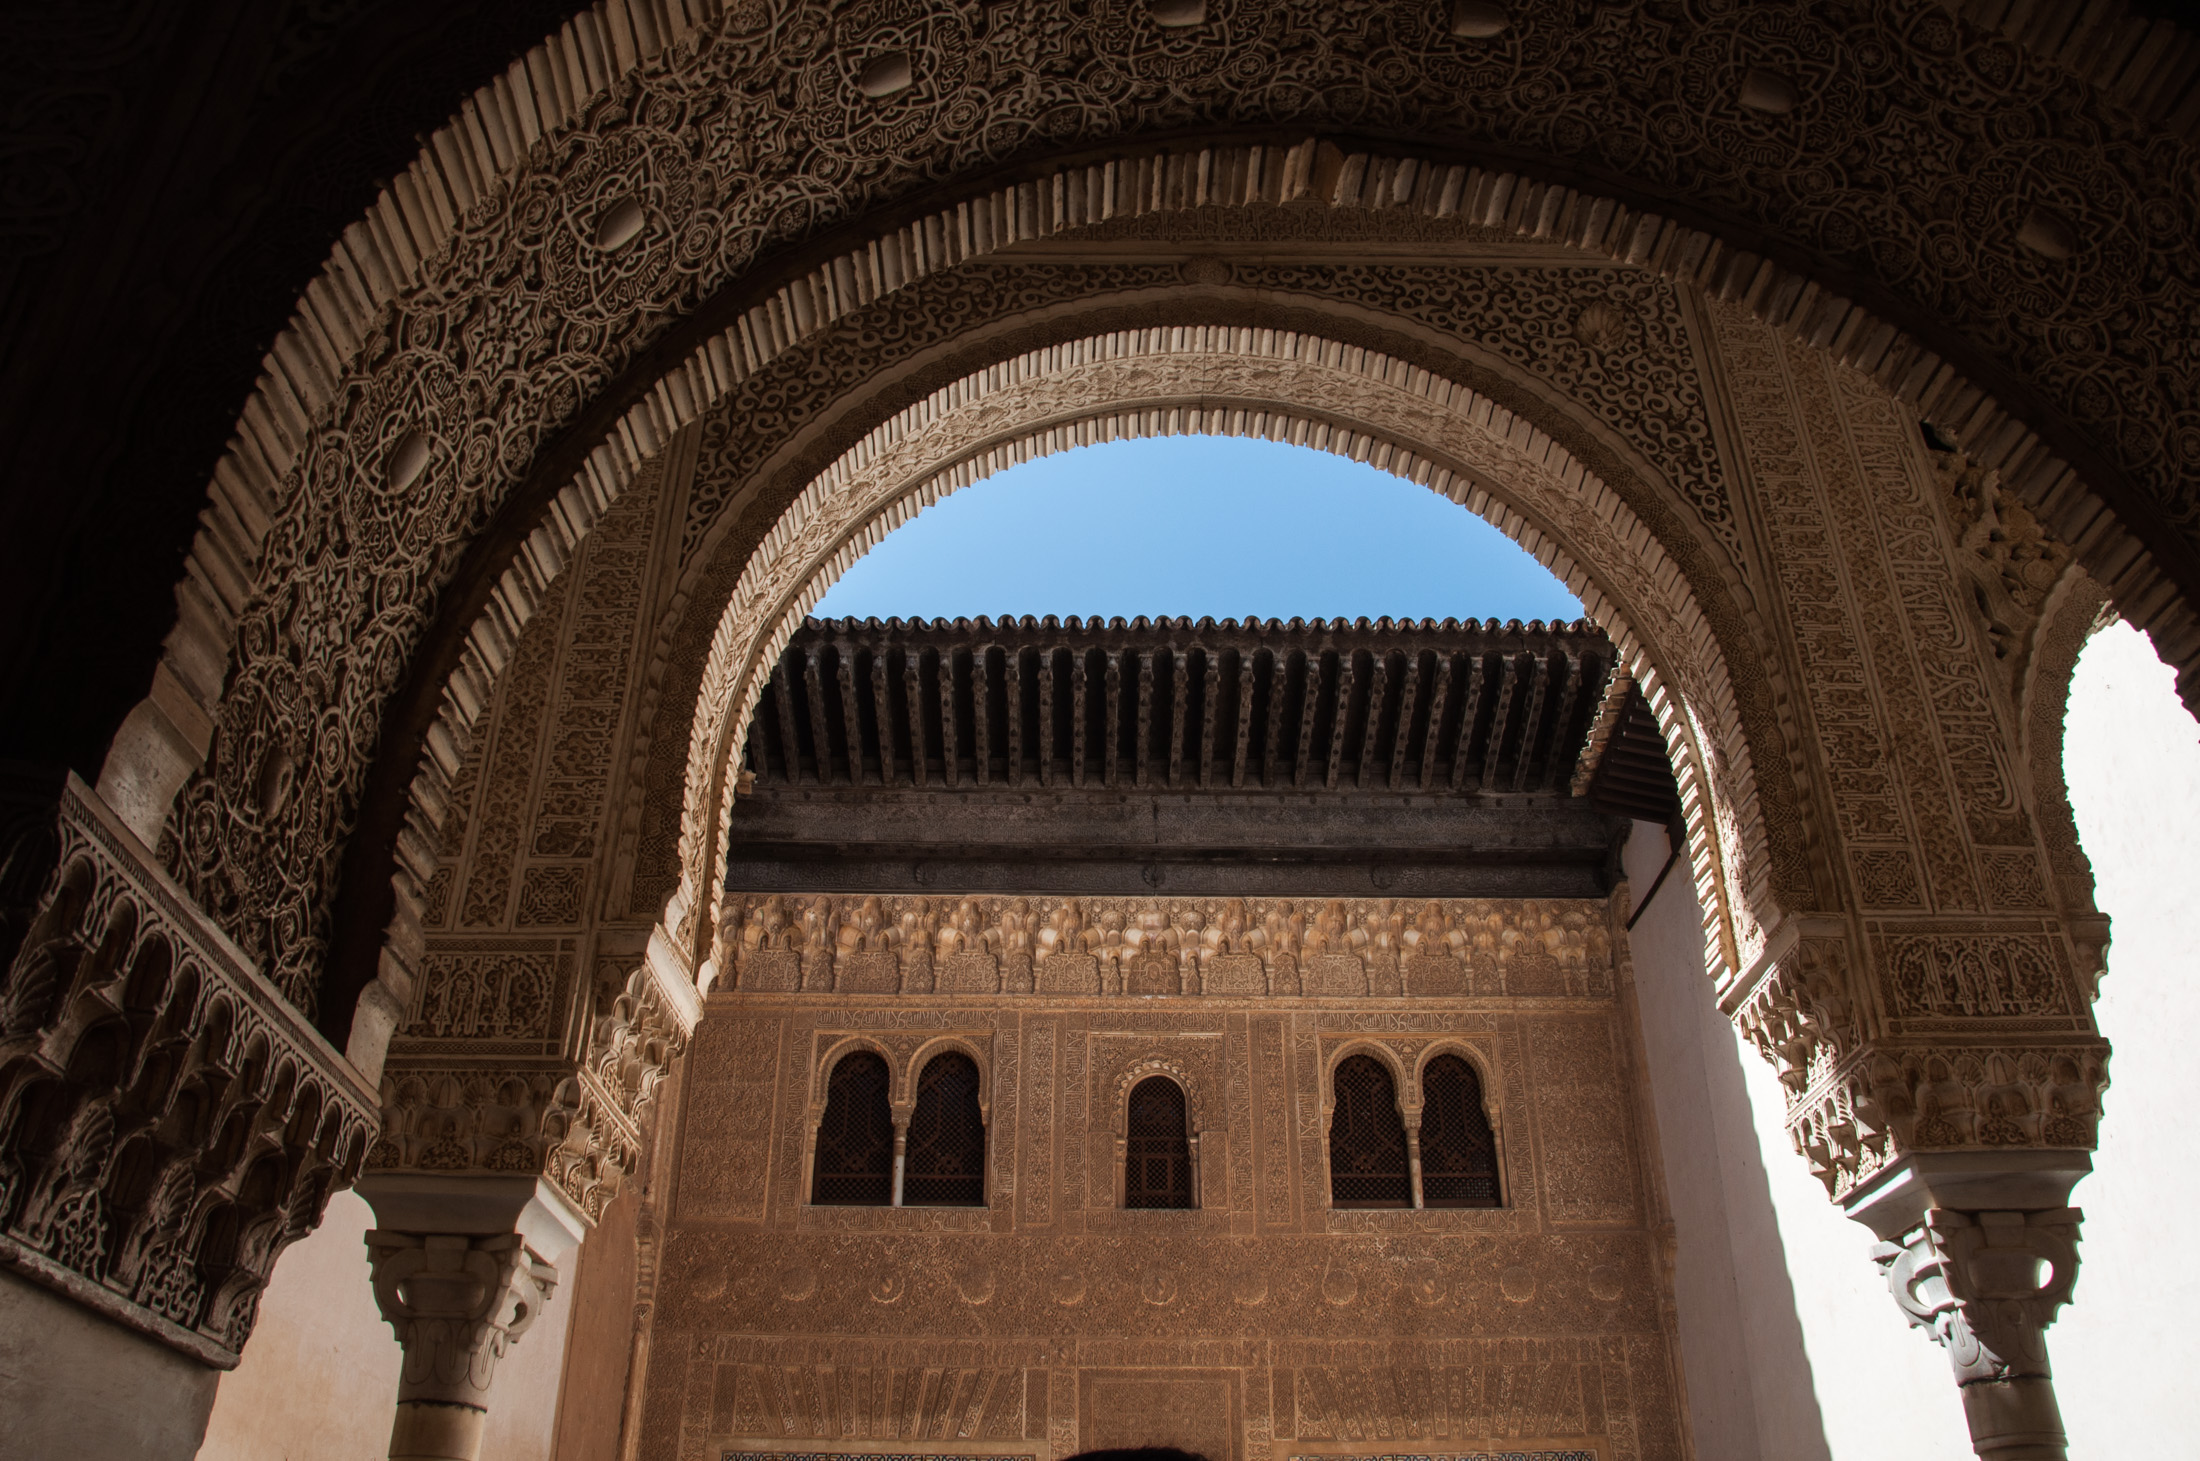 guided visit to the Alhambra and the Generalife